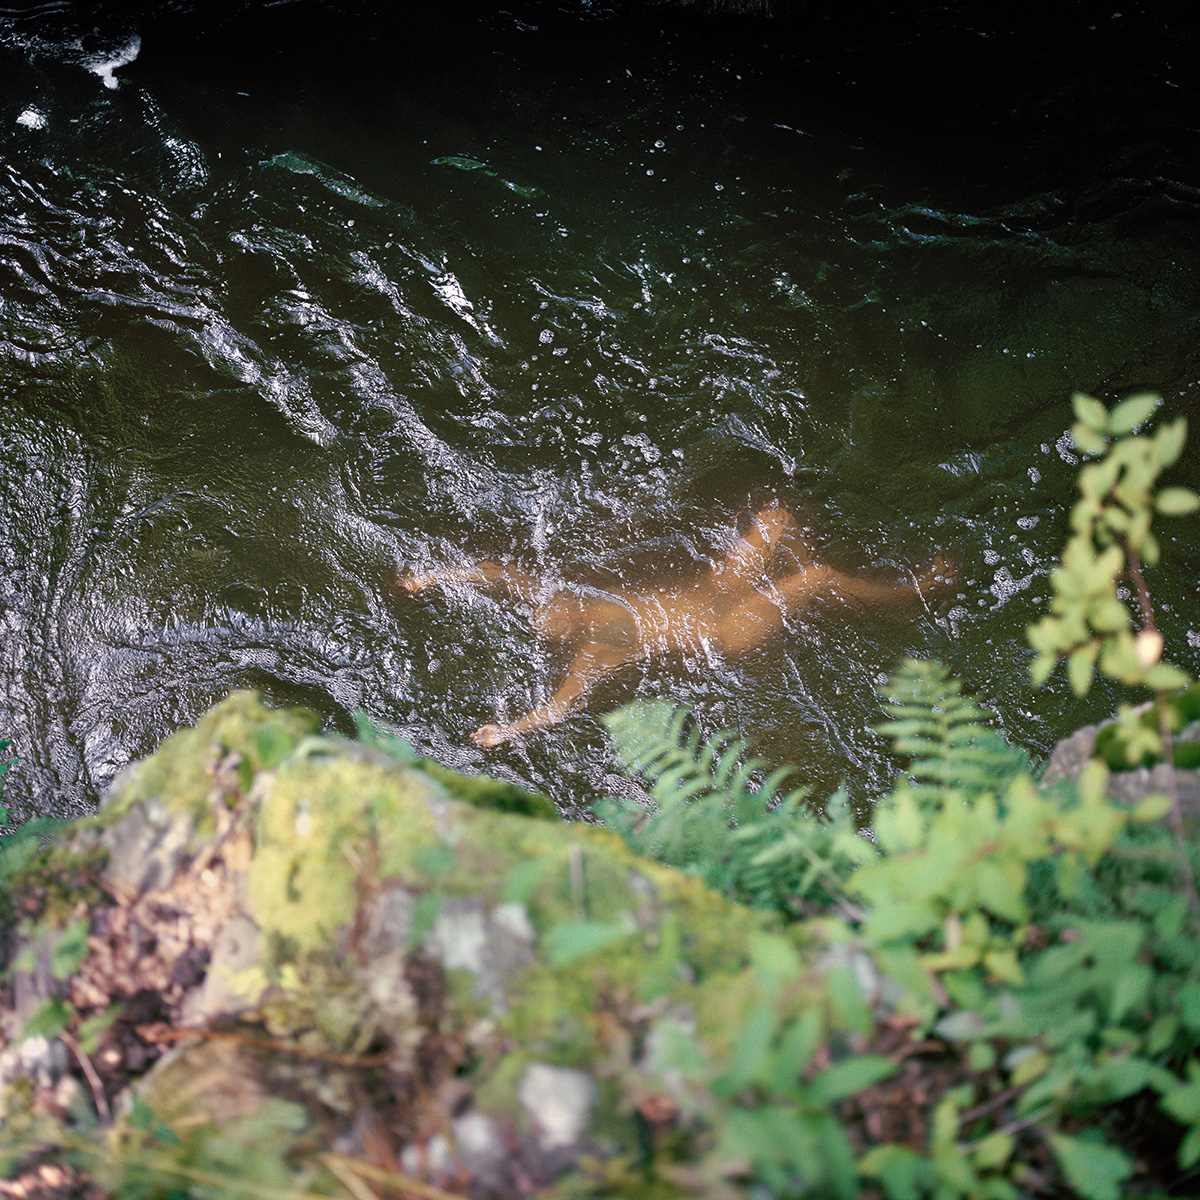 Vanessa at a swimming hole in Wassaic.